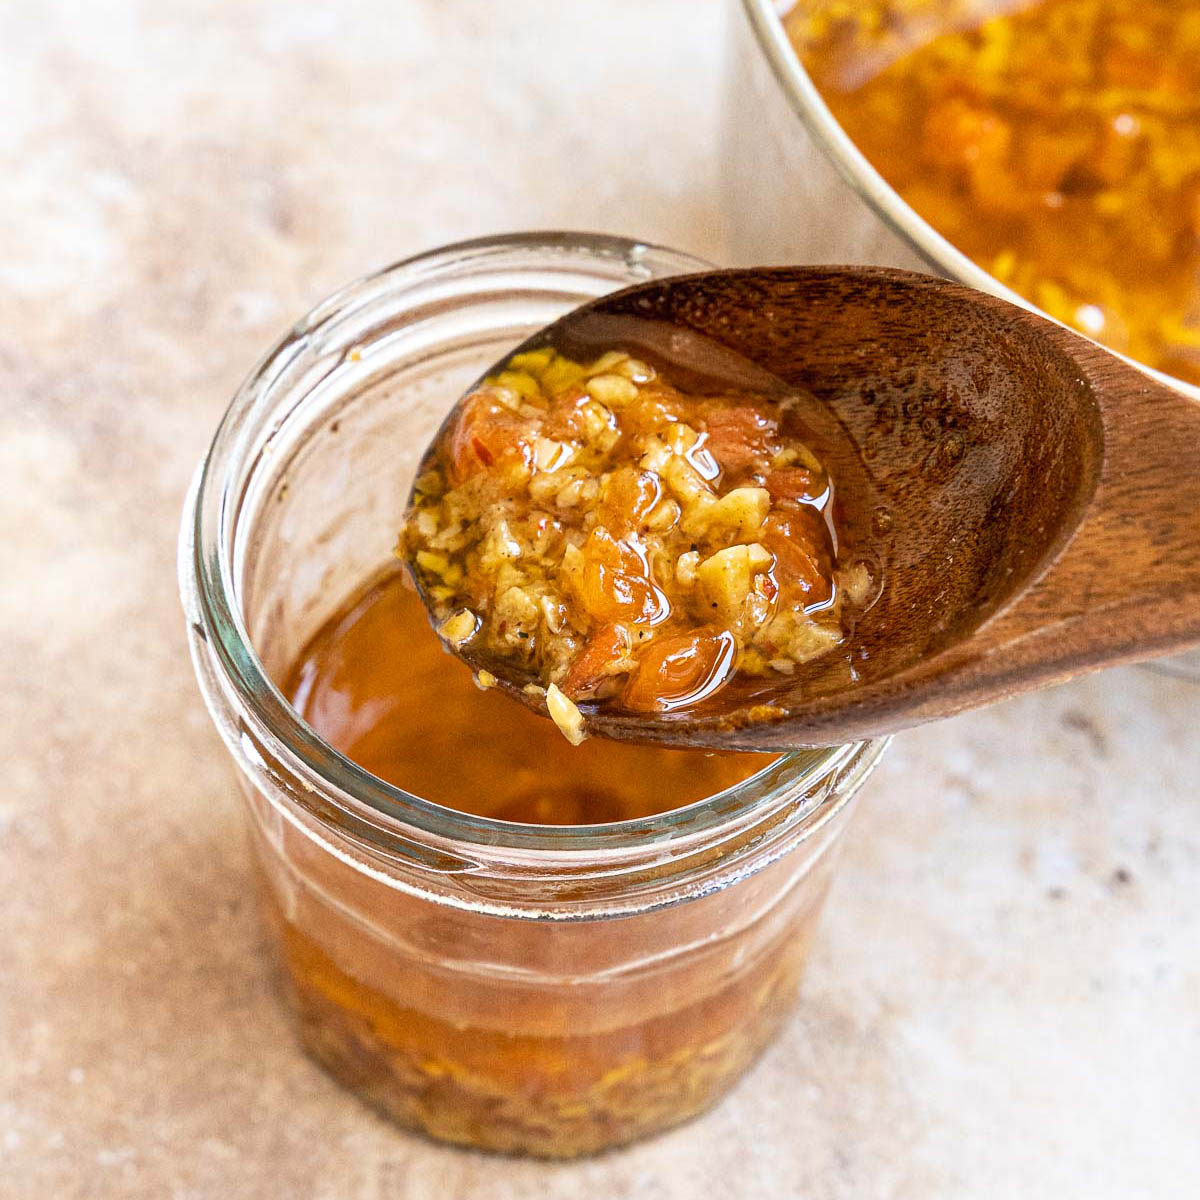 A jar of with mojo de ajo and a wood spoon.